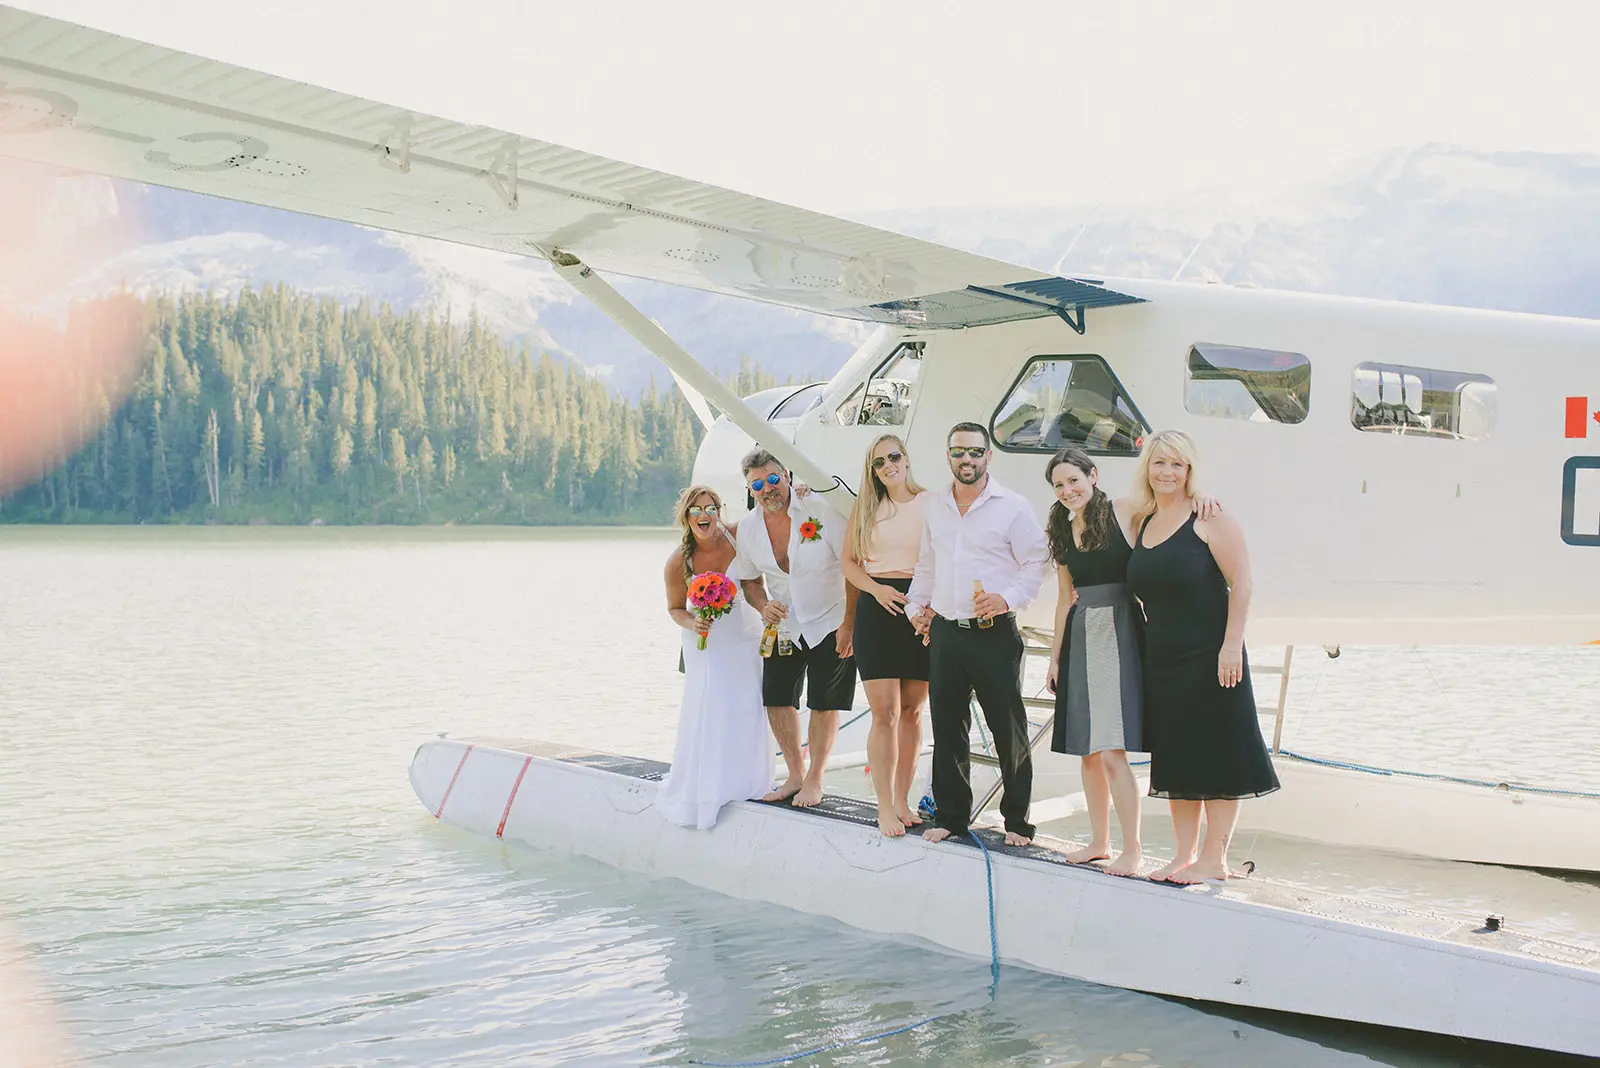 friends stand on the wing of a plane in phantom lake during an Adventure Elopement in British Columbia on the Sunshine Coast